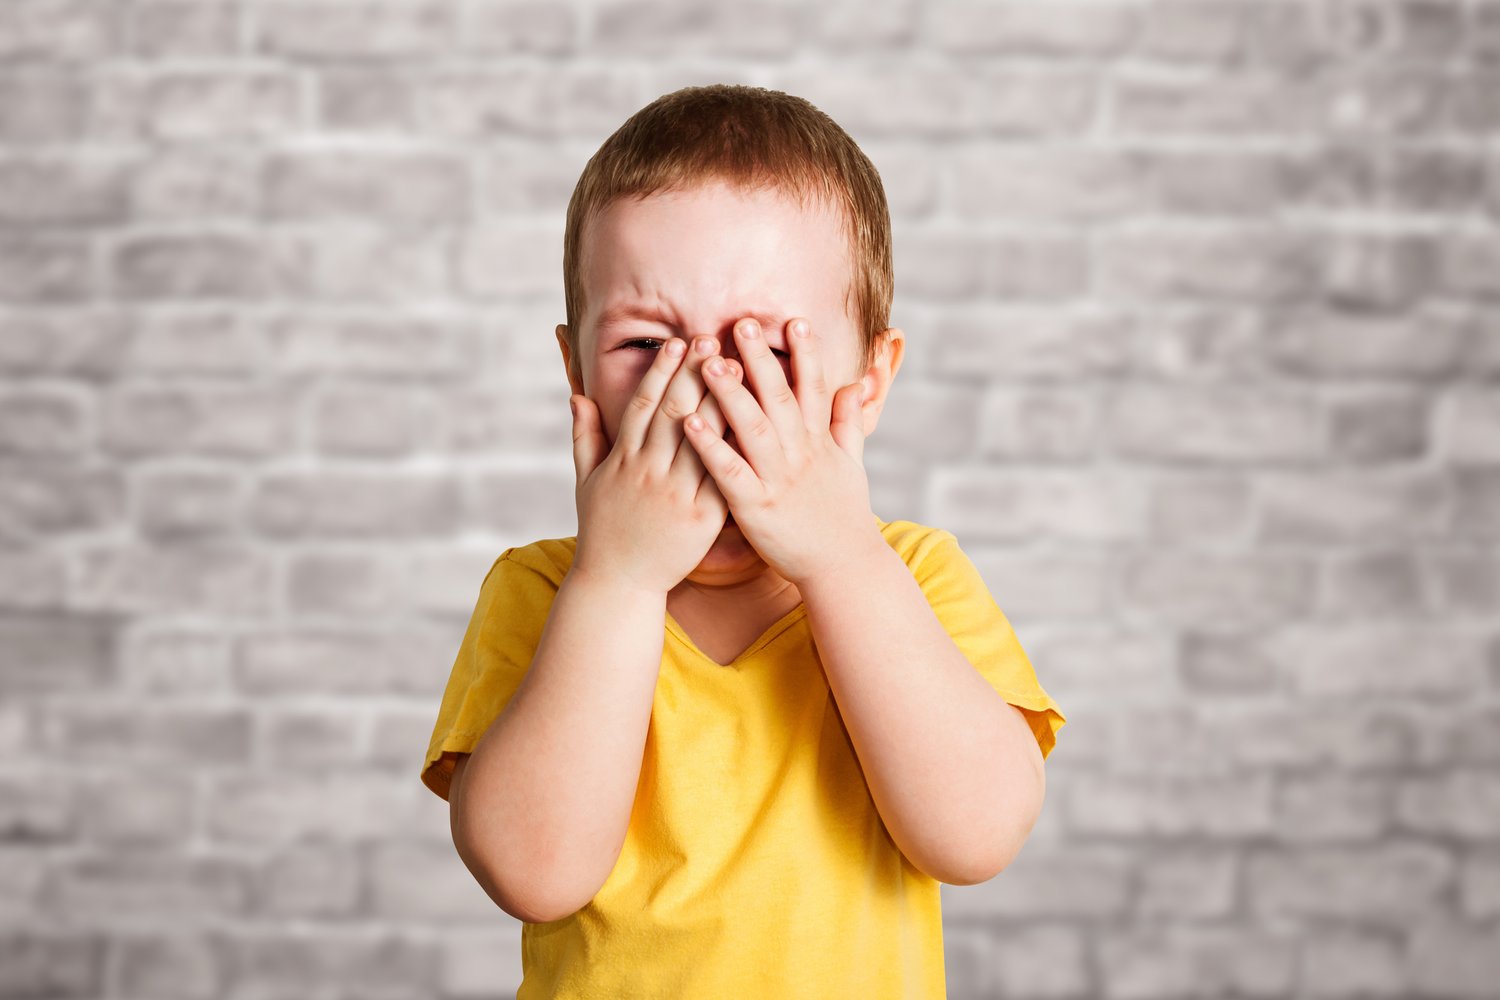 Big Feelings in Little People – Ways to Support Children in Managing Difficult Emotions